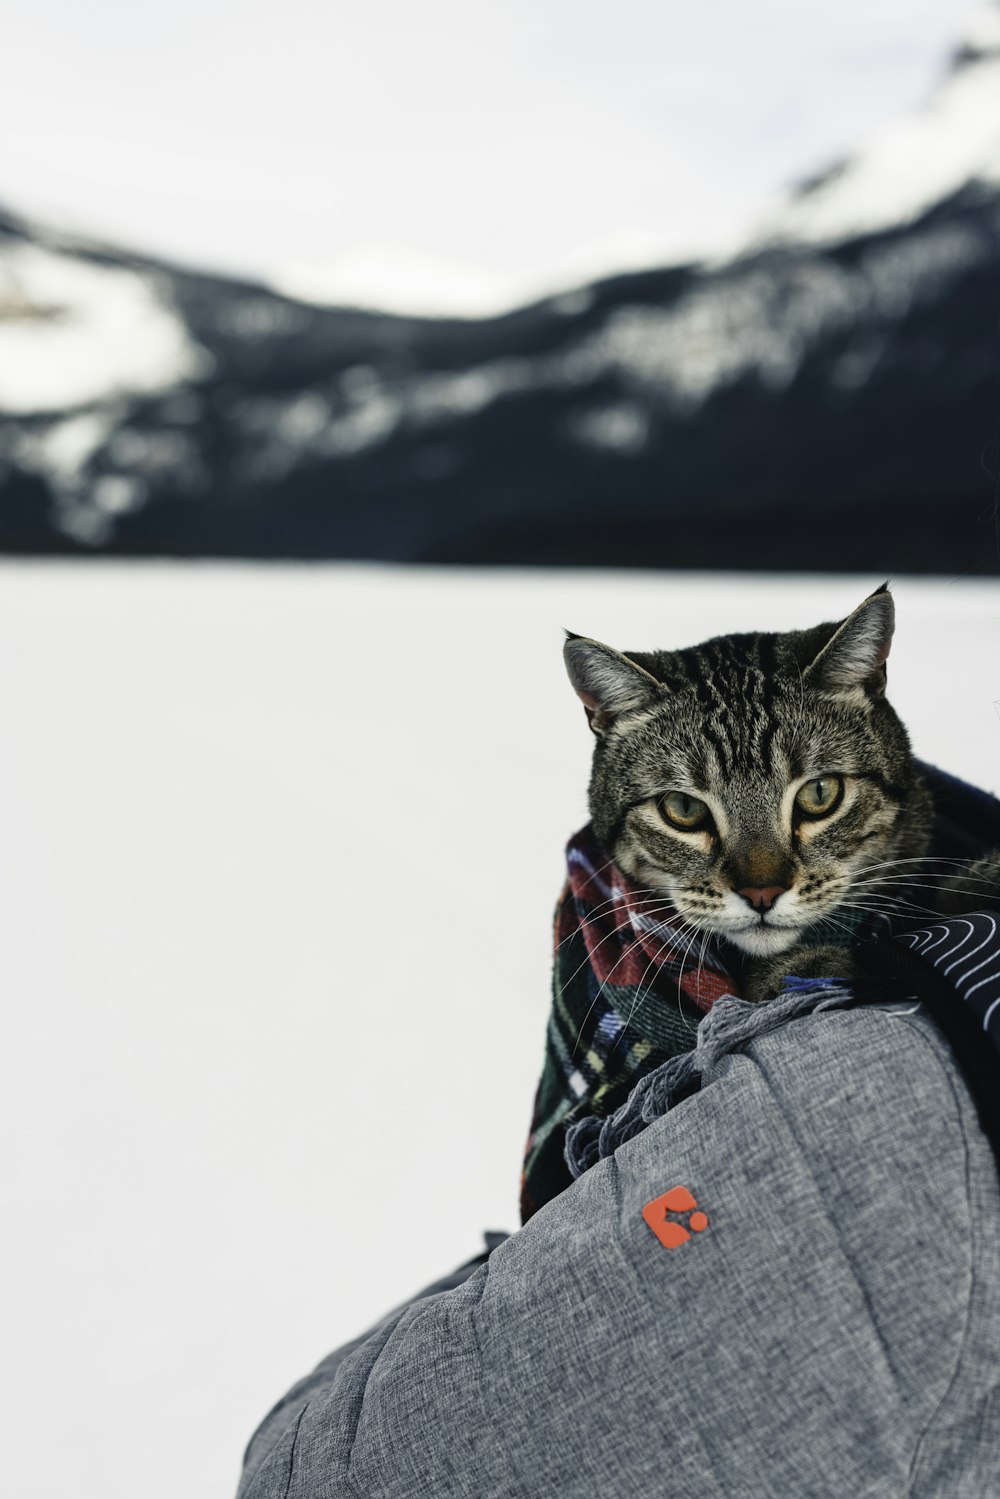 a cat that is sitting on someone's back in the snow